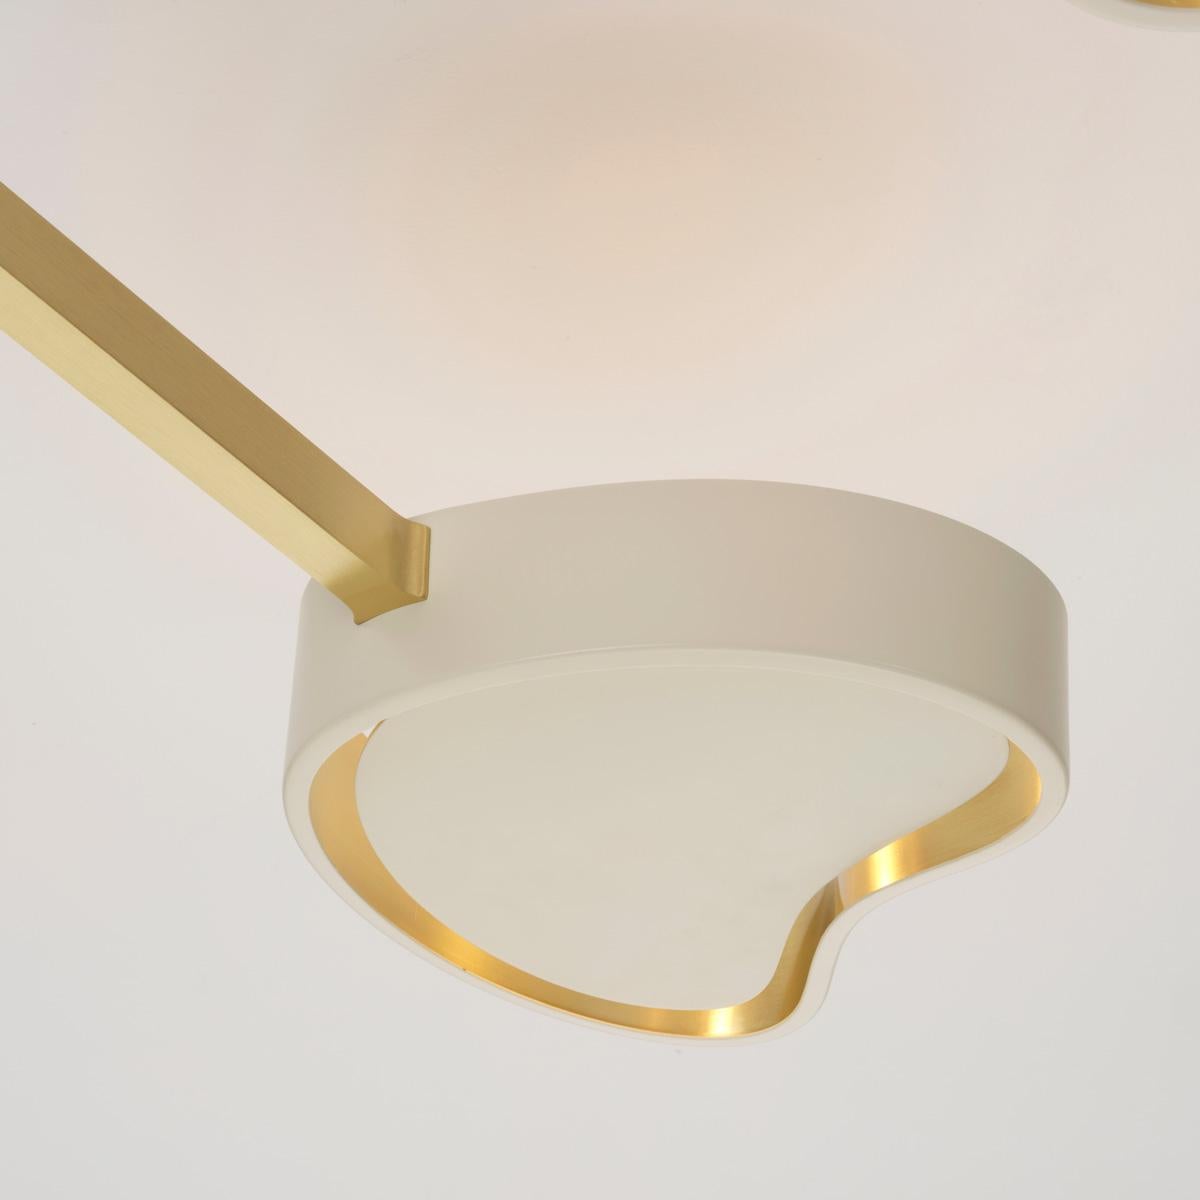 Cuore N.3 Ceiling Light by Gaspare Asaro. Satin Brass and Sand White For Sale 2